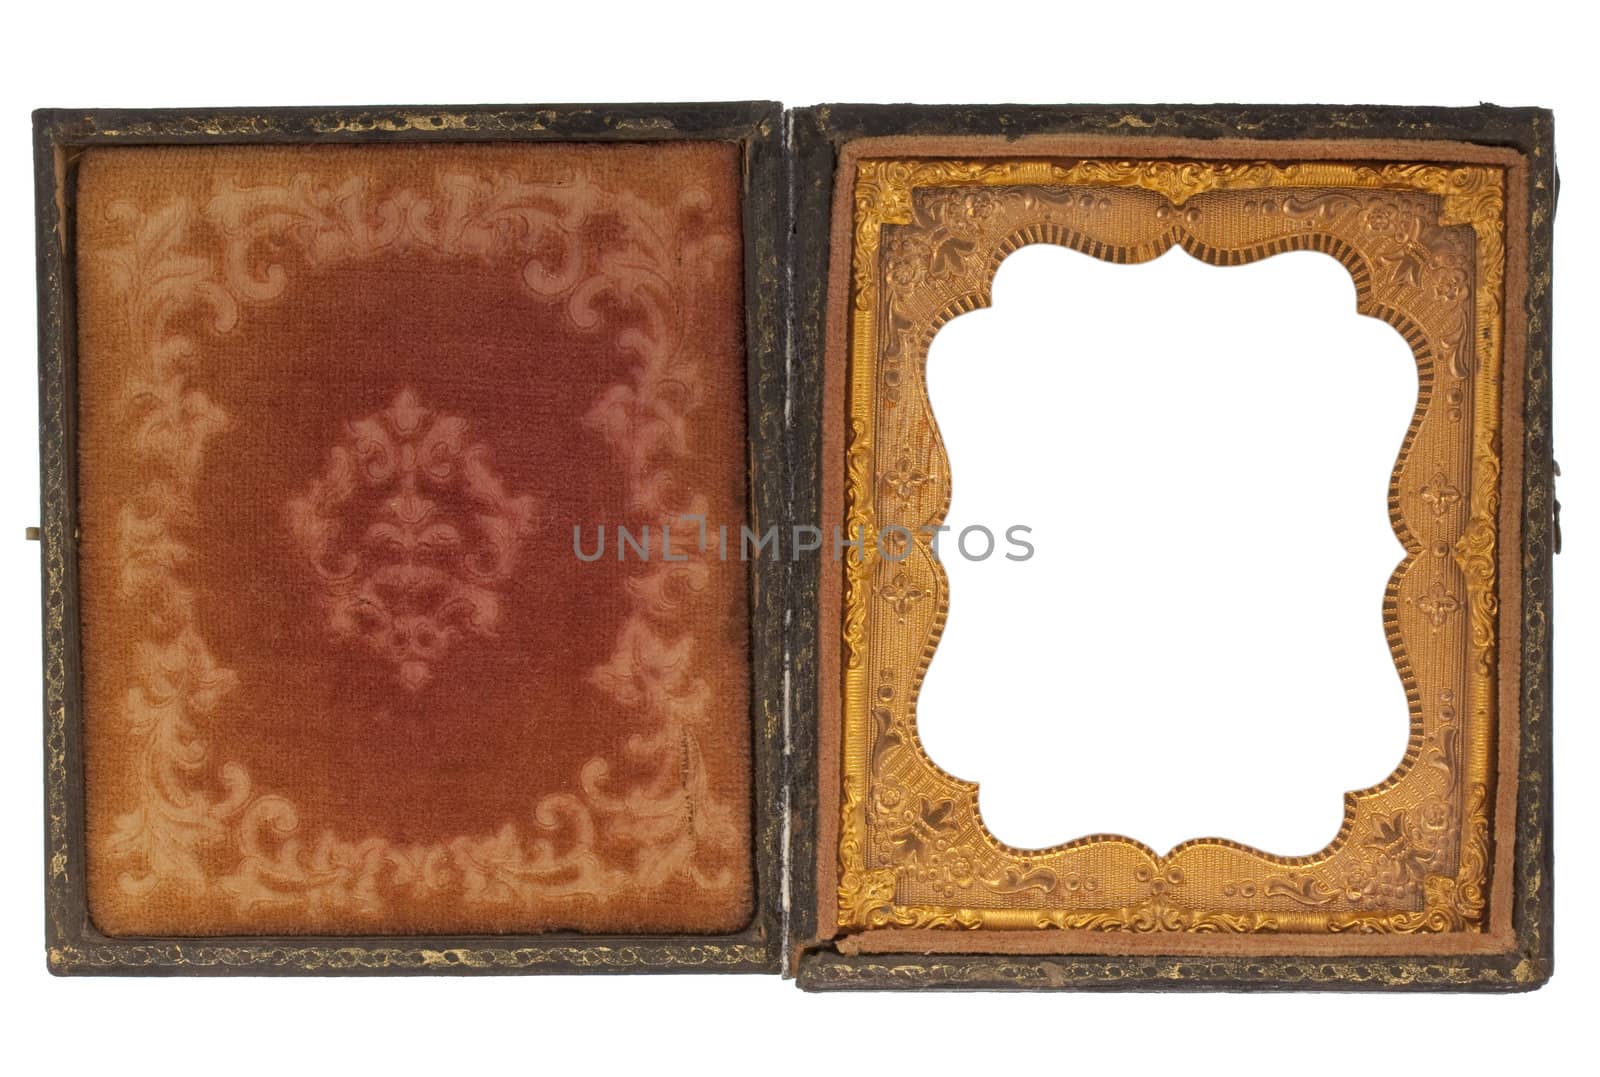 antique, worn out, clamshell photo case from nineeteenth century tintype or dagguerotype portrait, red faded fabric and gold frame with floral ornaments, picture frame isolated with clipping path